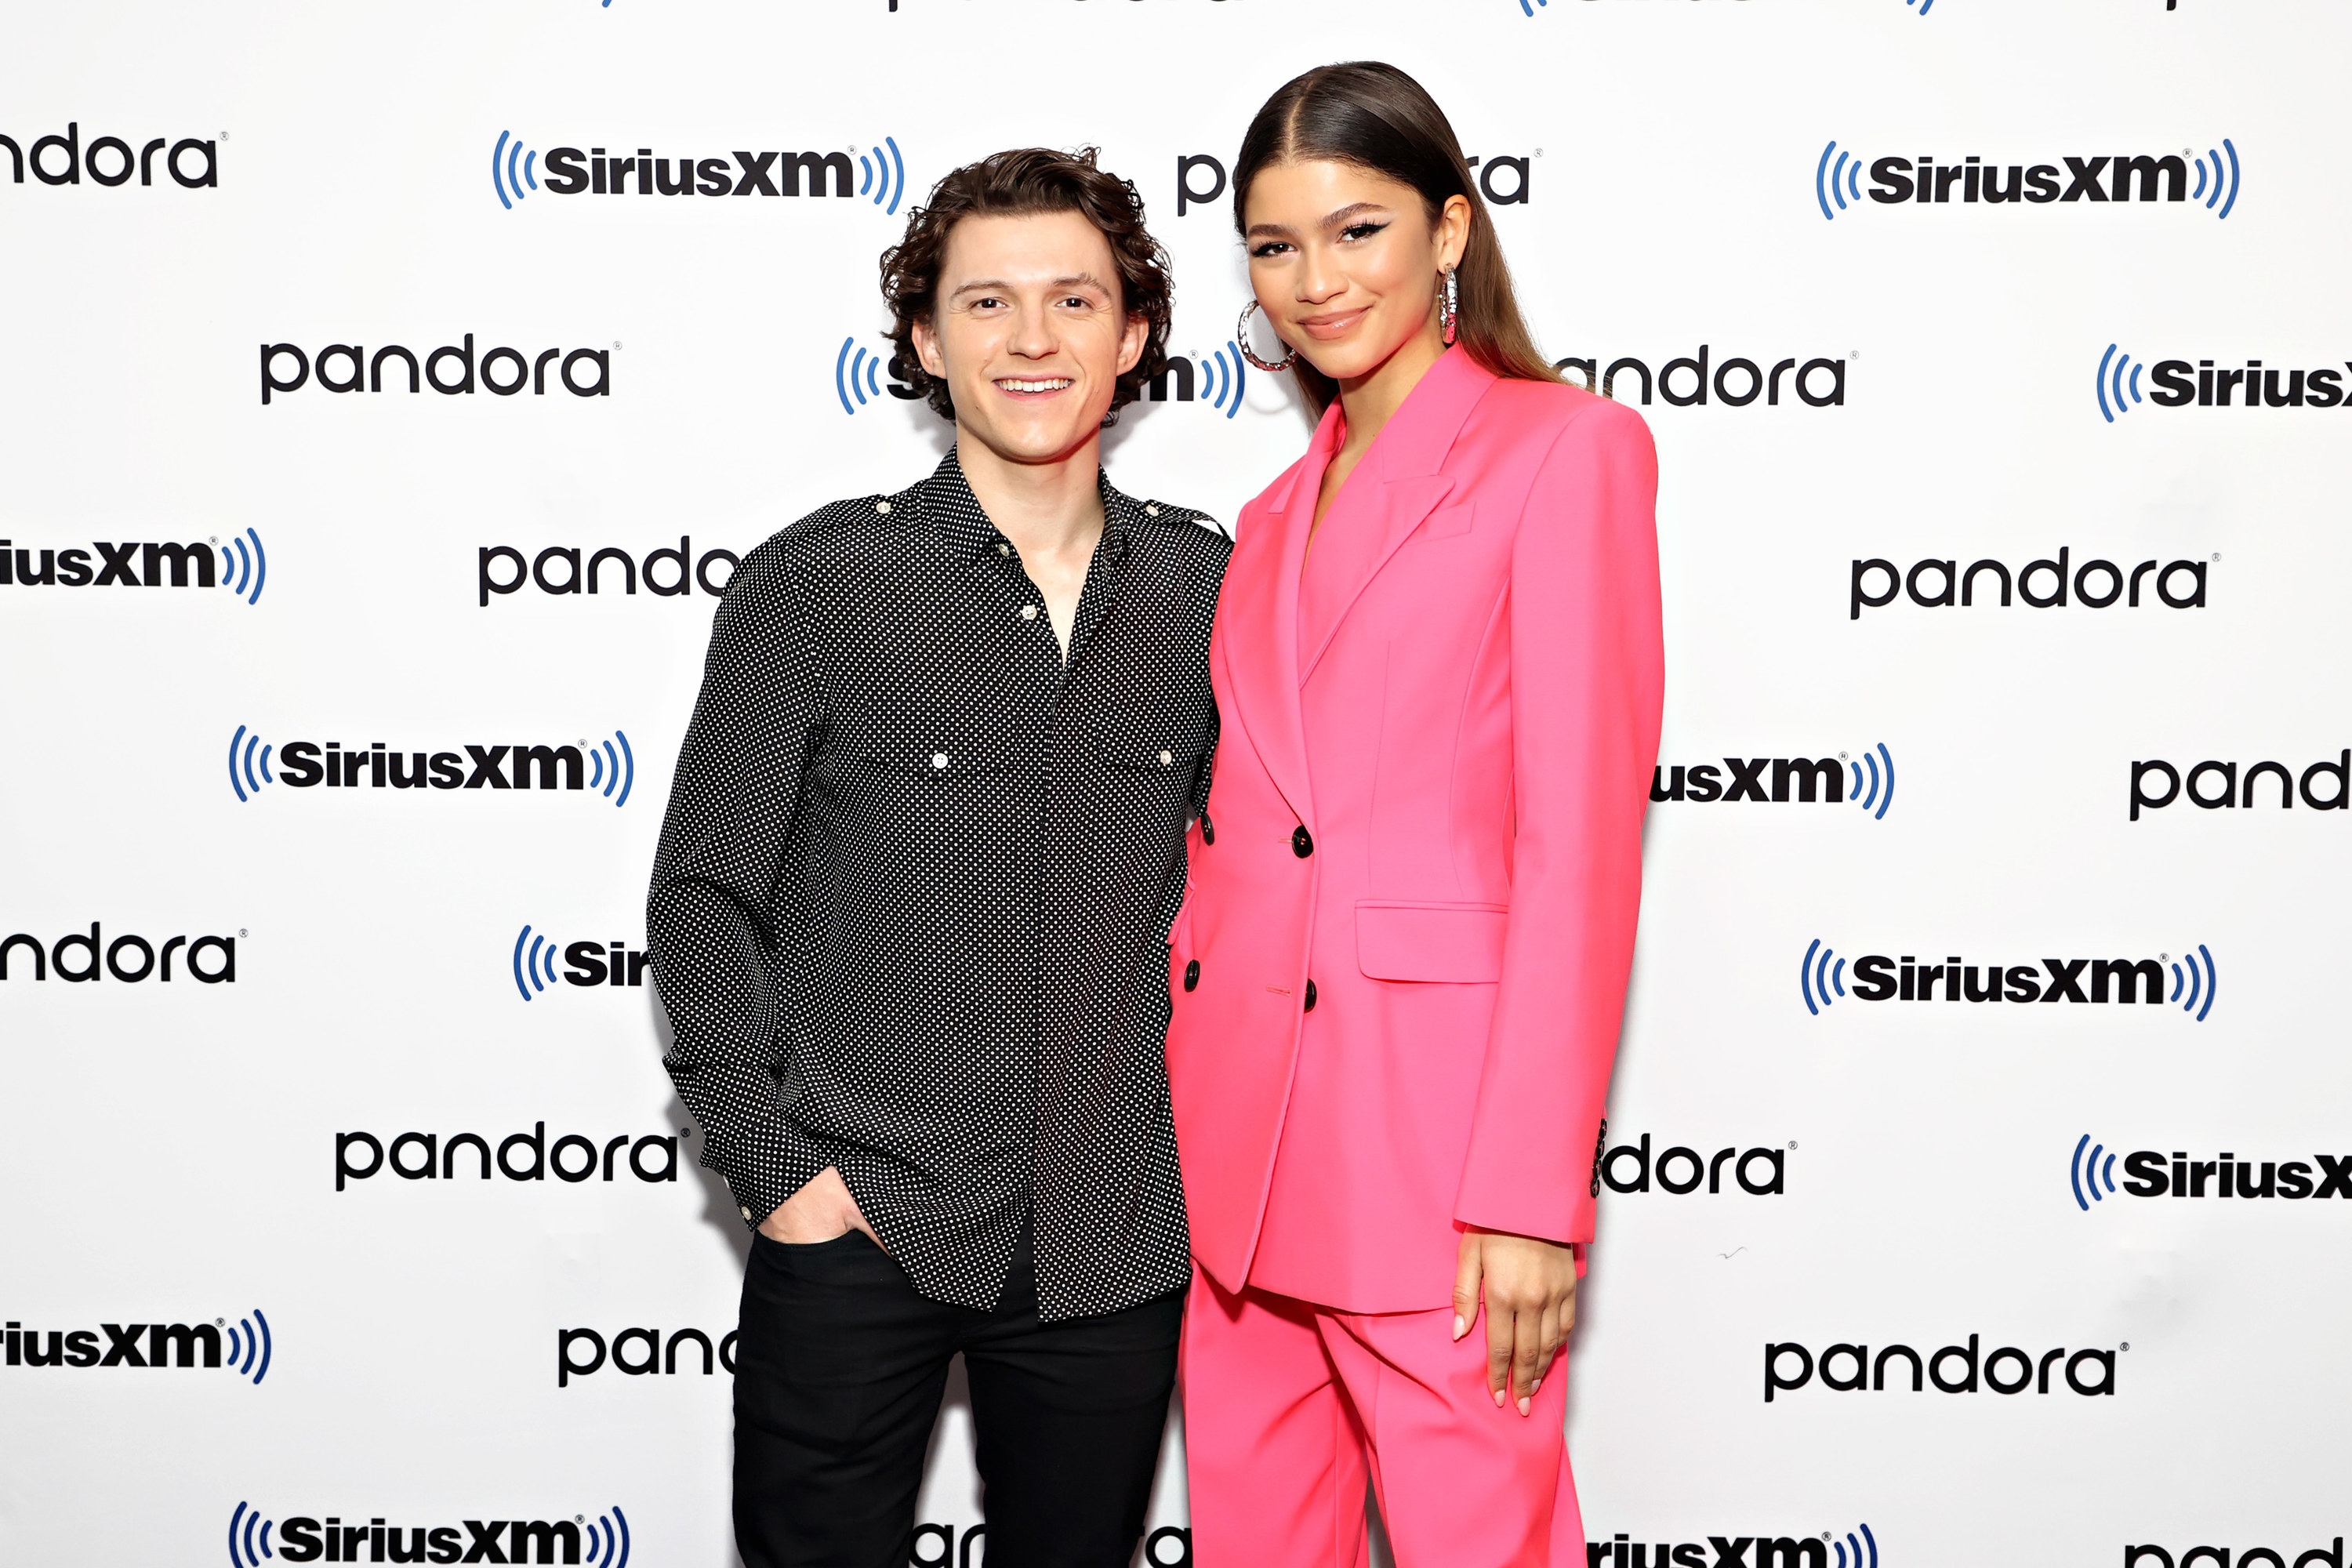 the couple on a red carpet for SiriusXM